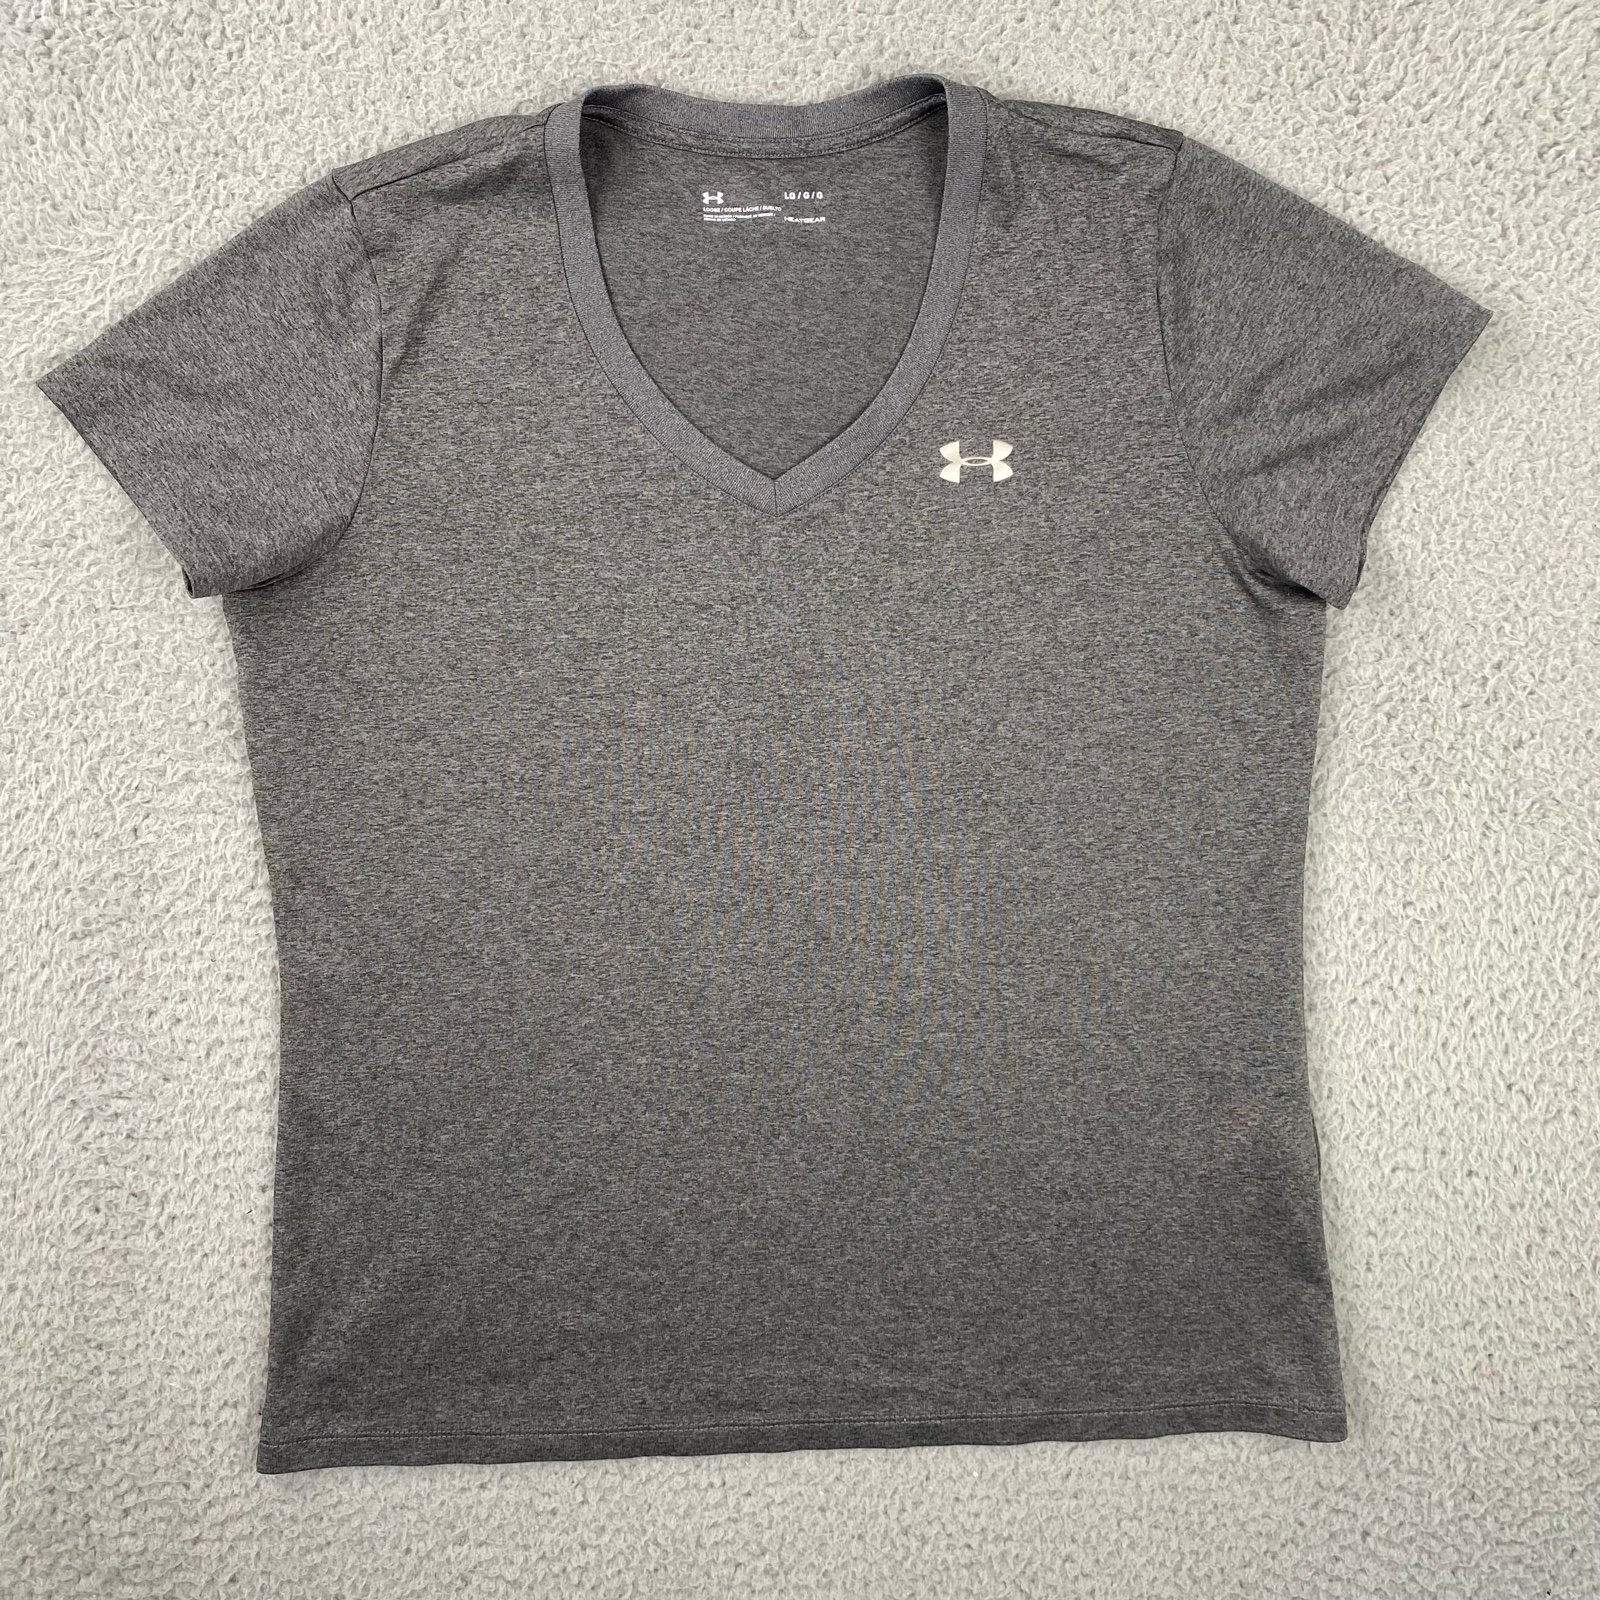 Under Armour Womens Solid Tech V-Neck Shirt Carbon Gray